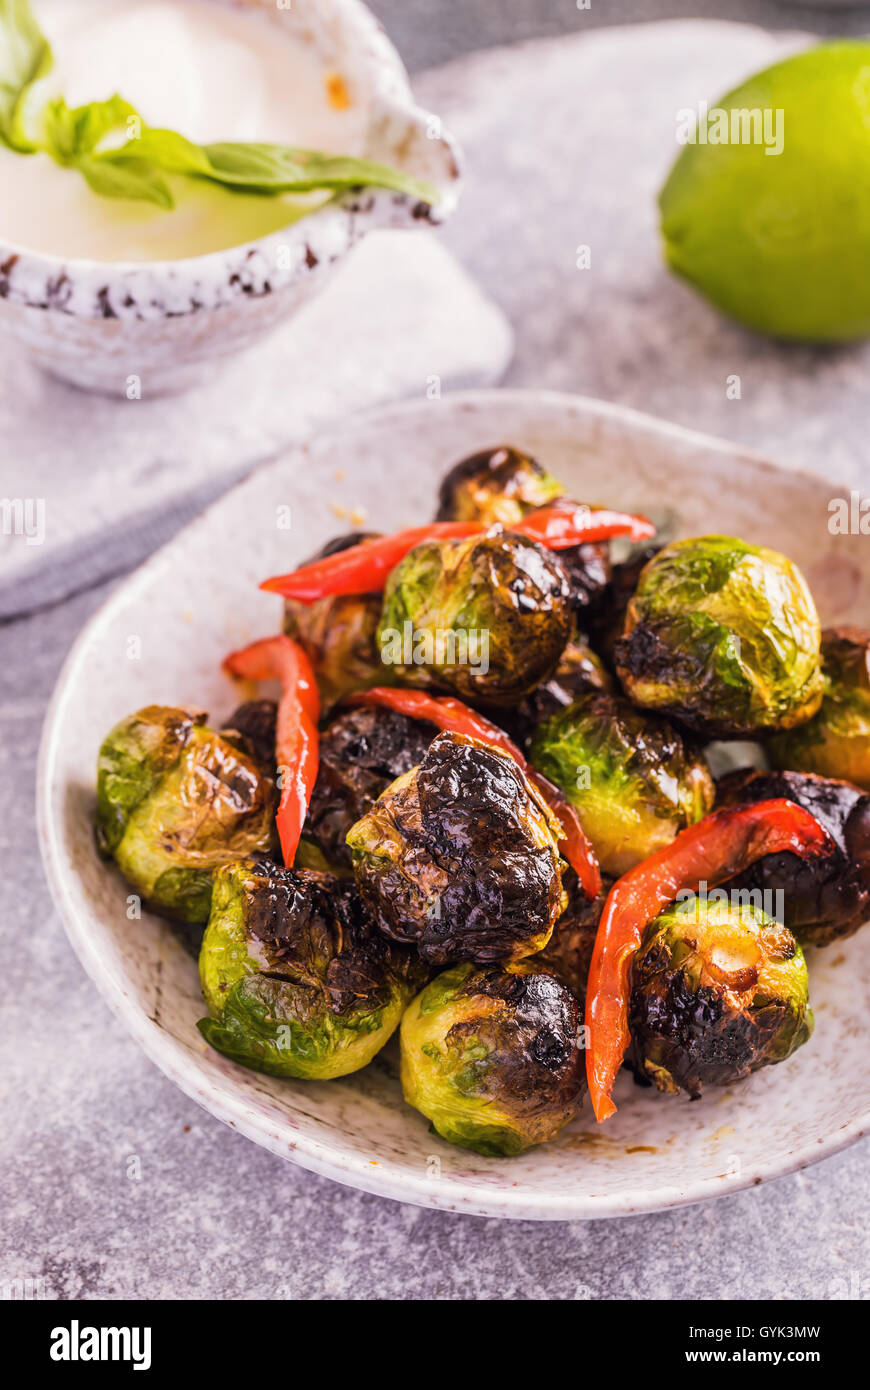 Roasted Brussels sprouts Stock Photo